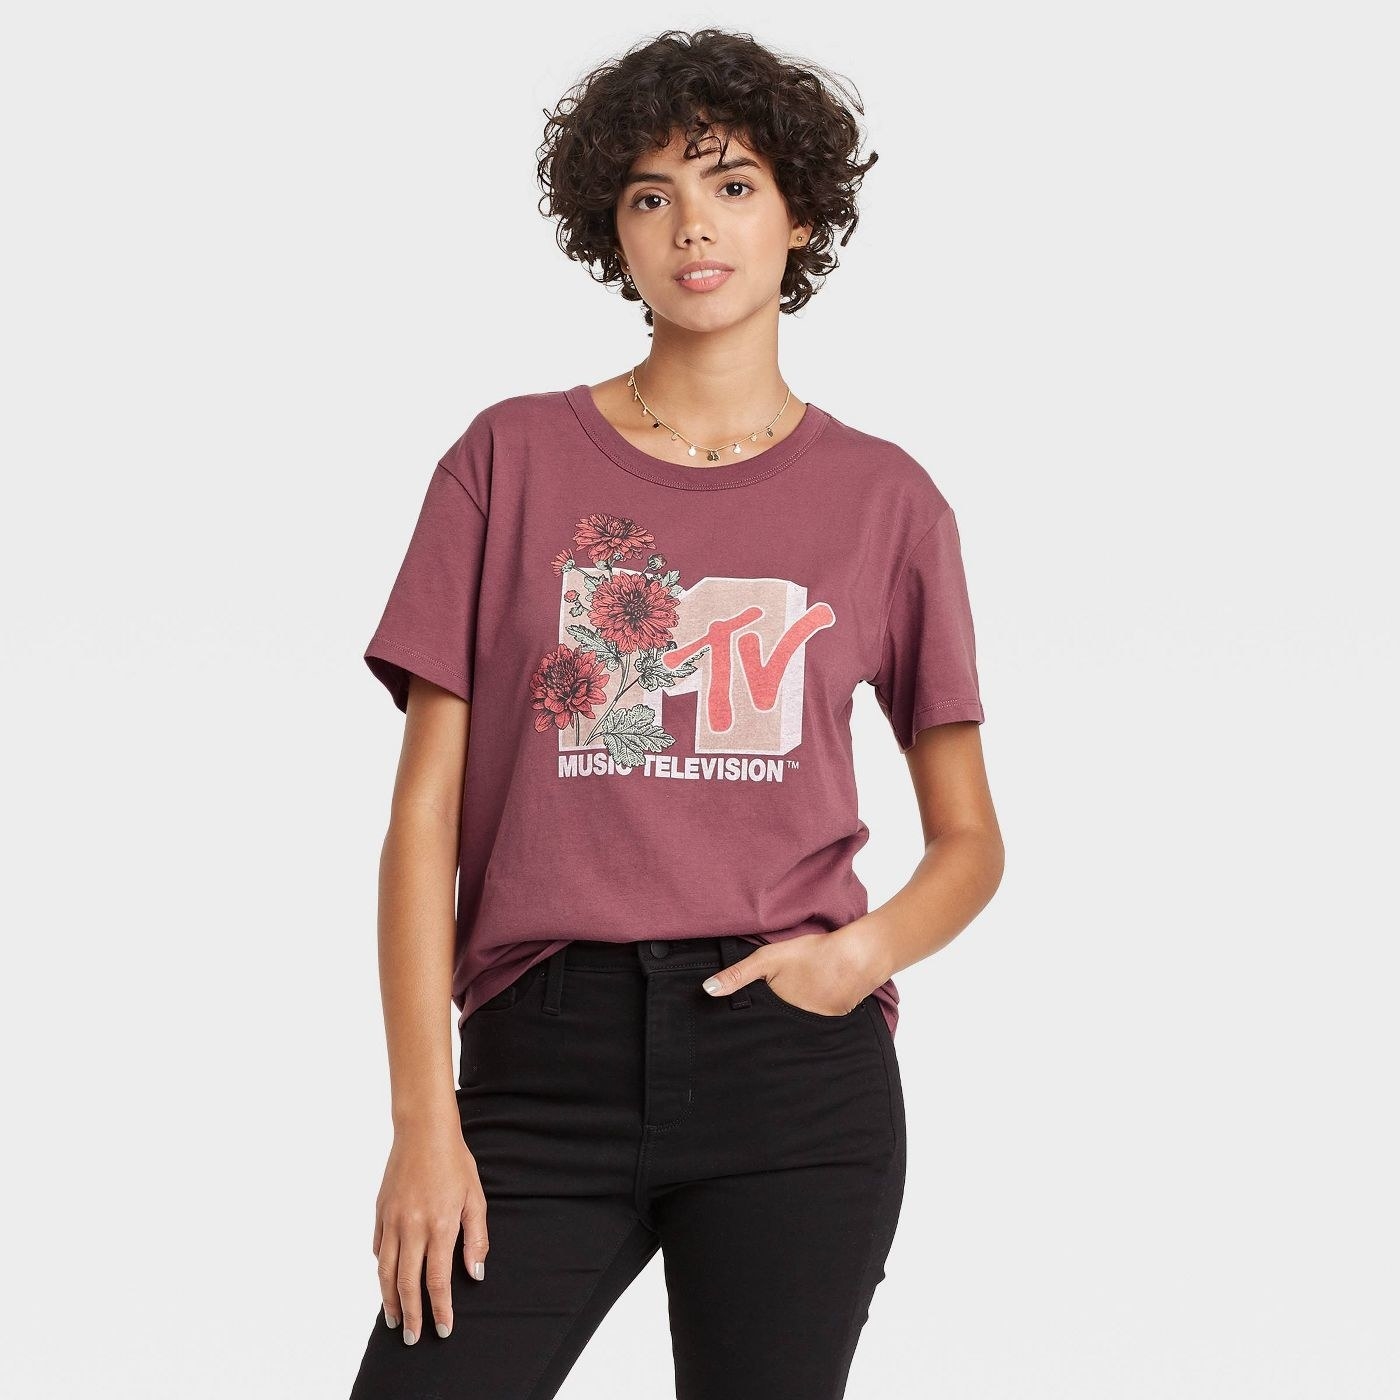 Model wearing the burgundy MTV floral print chart graphic t-shirt